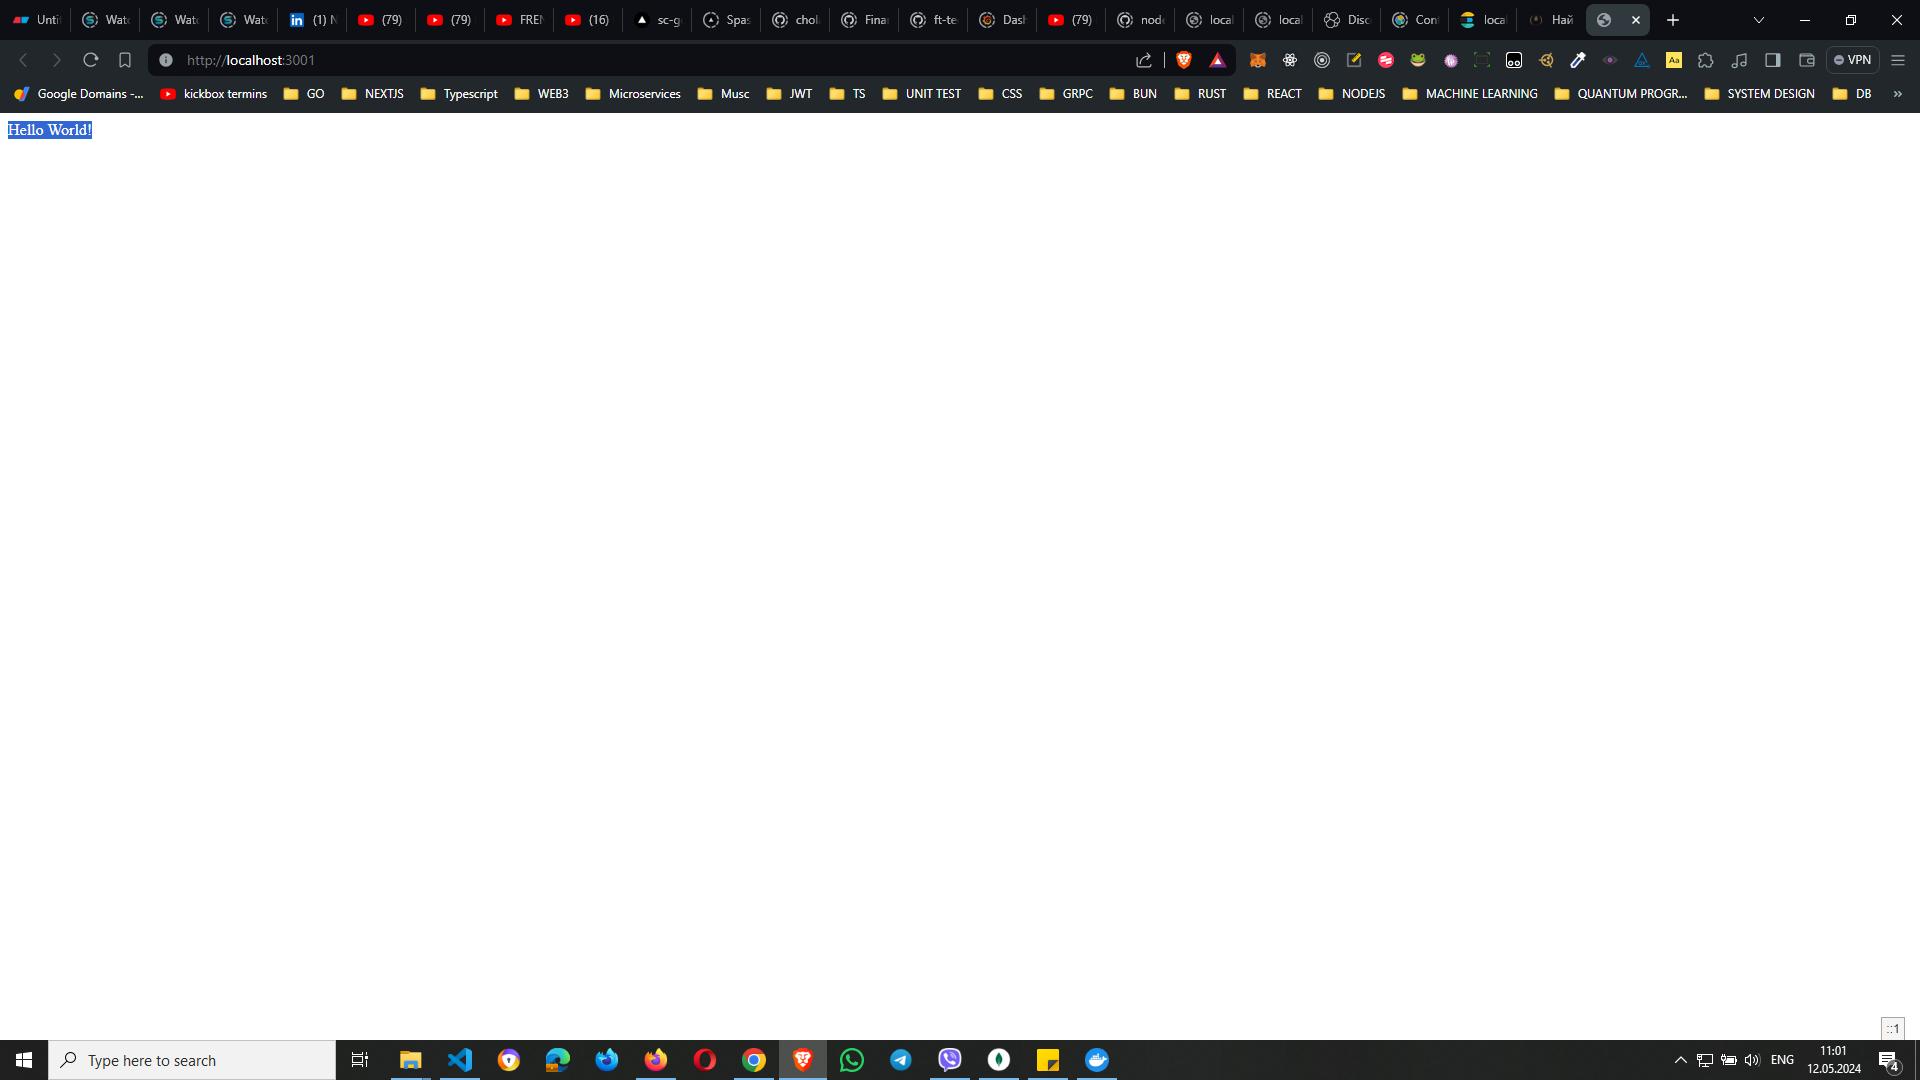 Browser window displaying a simple web page with the text `Hello World!` from a local server running on http://localhost:3001.